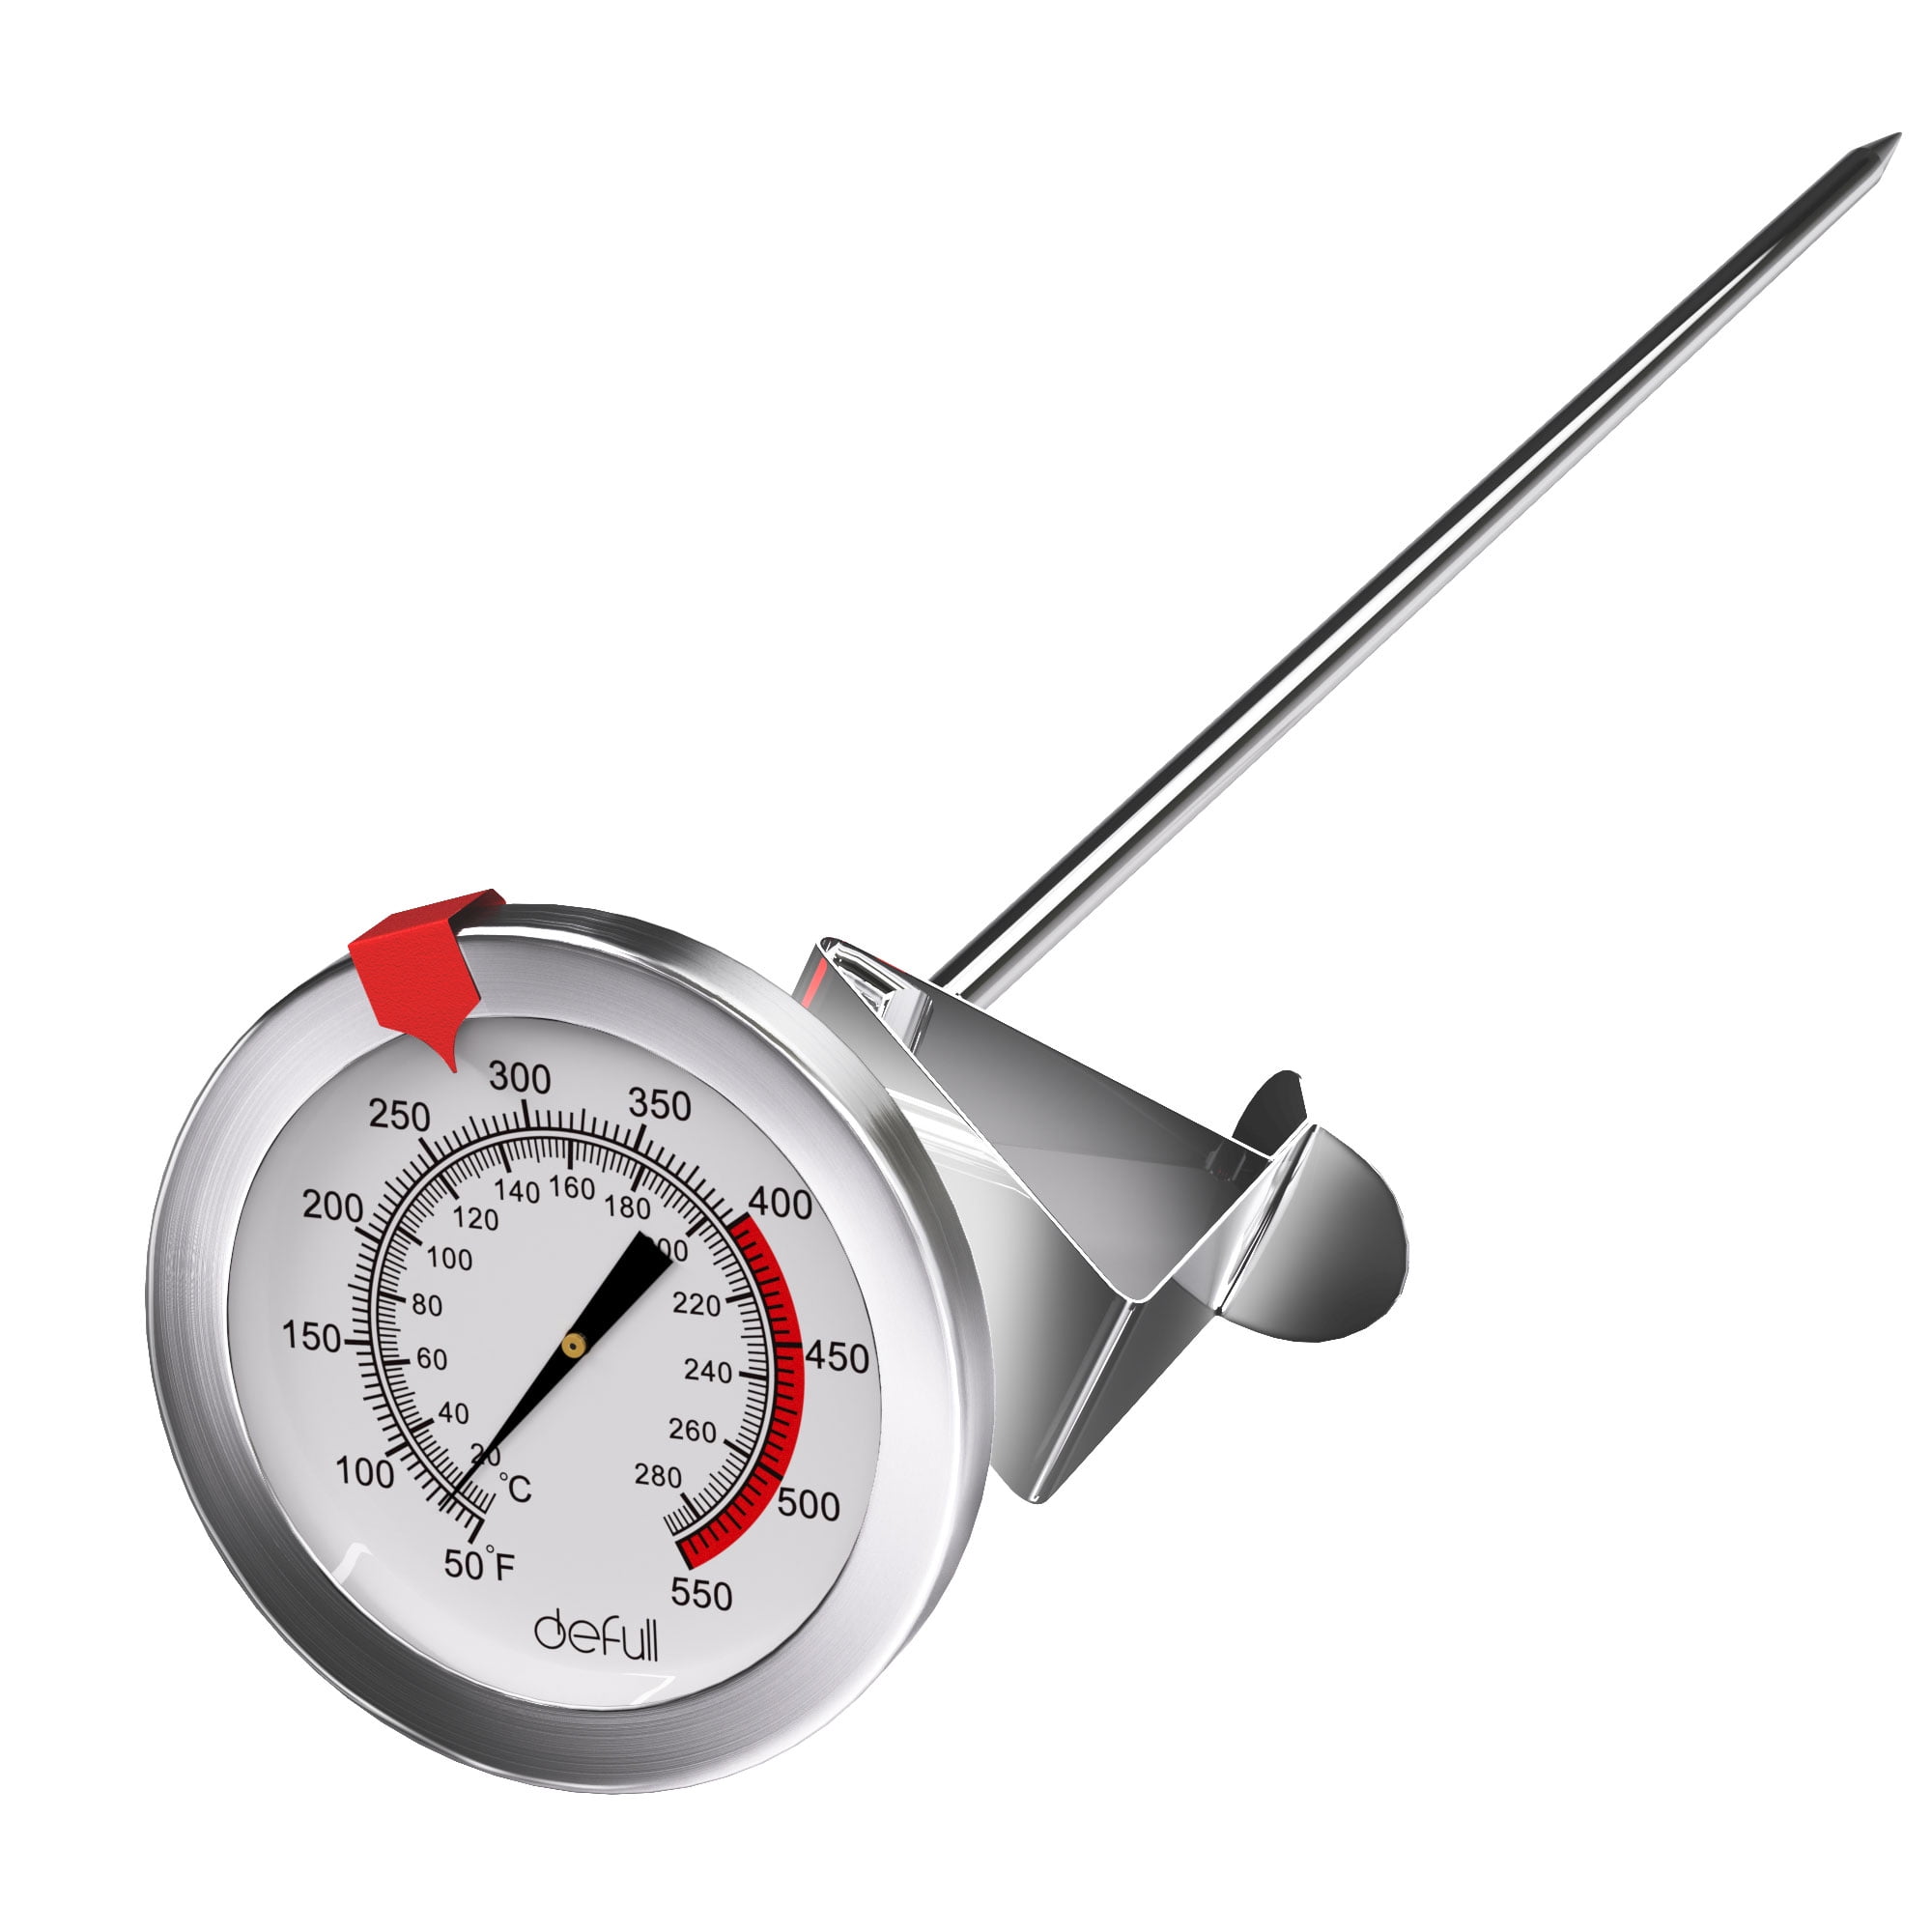 Jual defull Large 3 inch Dial Oven Thermometer Clear Large Number - Jakarta  Utara - Home And Kitchen Usa